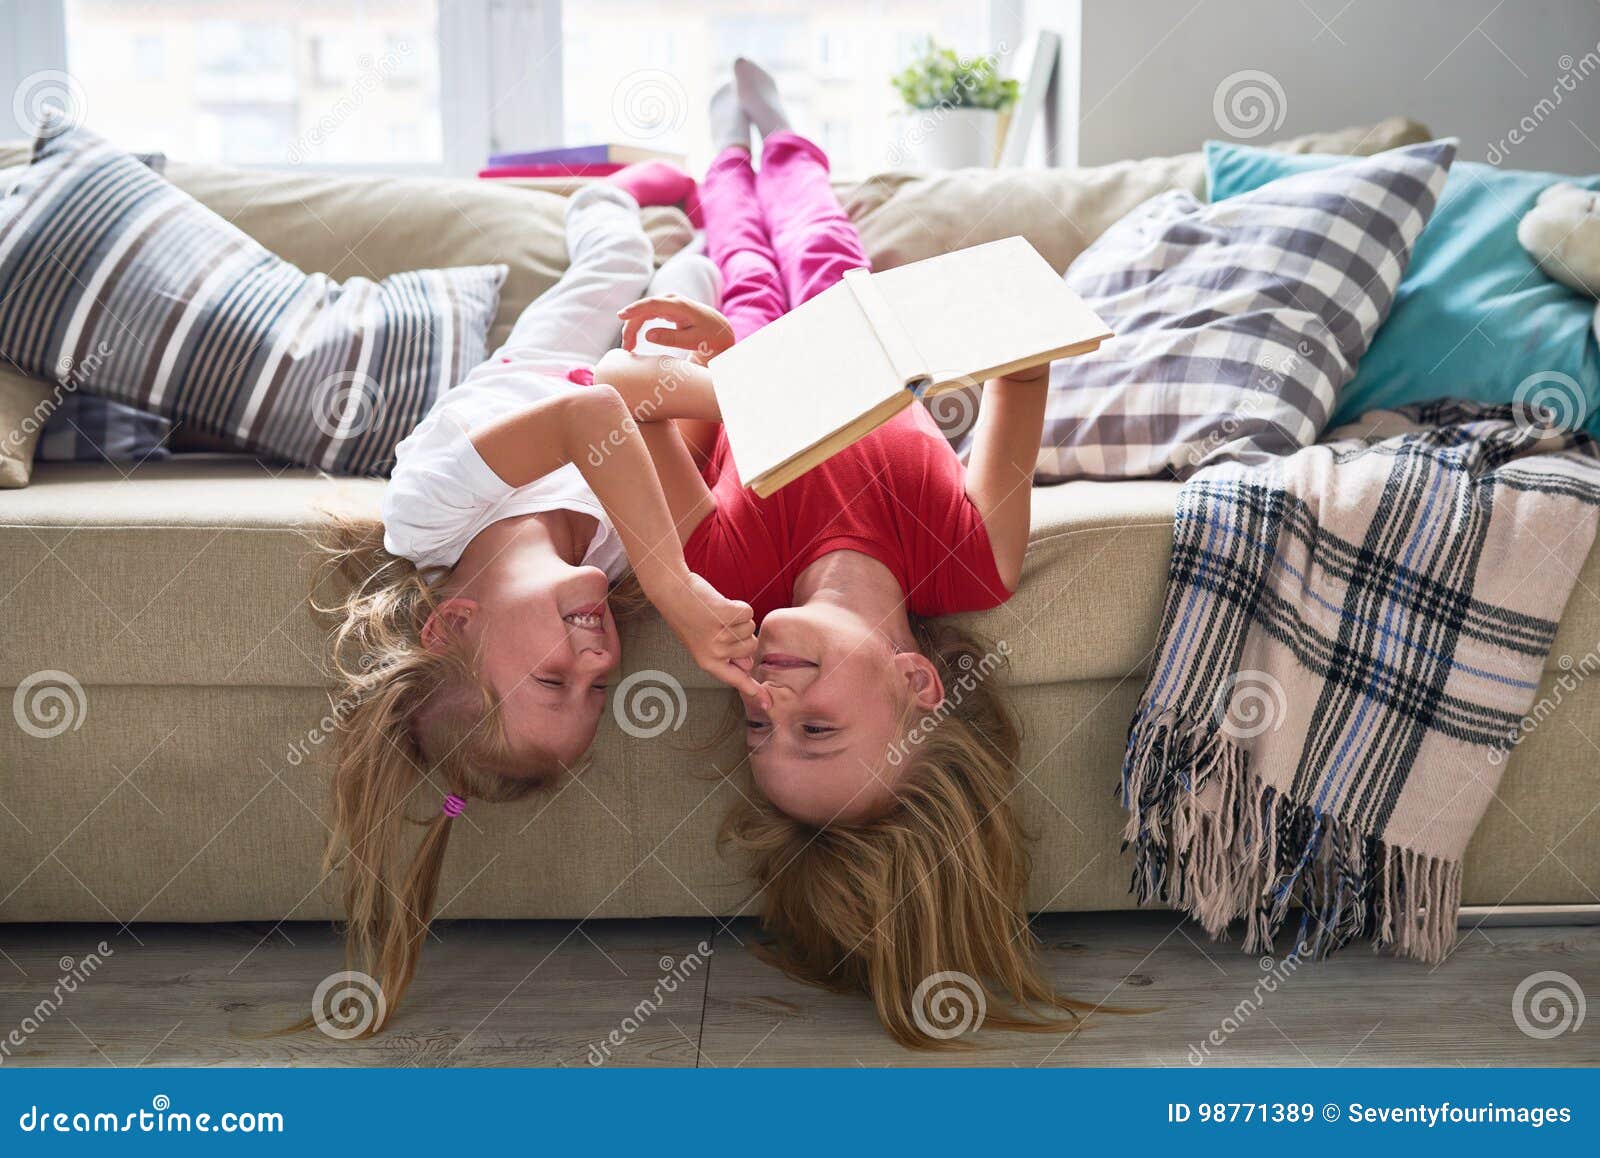 Cute Little Sisters Playing Together Stock Image Image Of Love Sofa